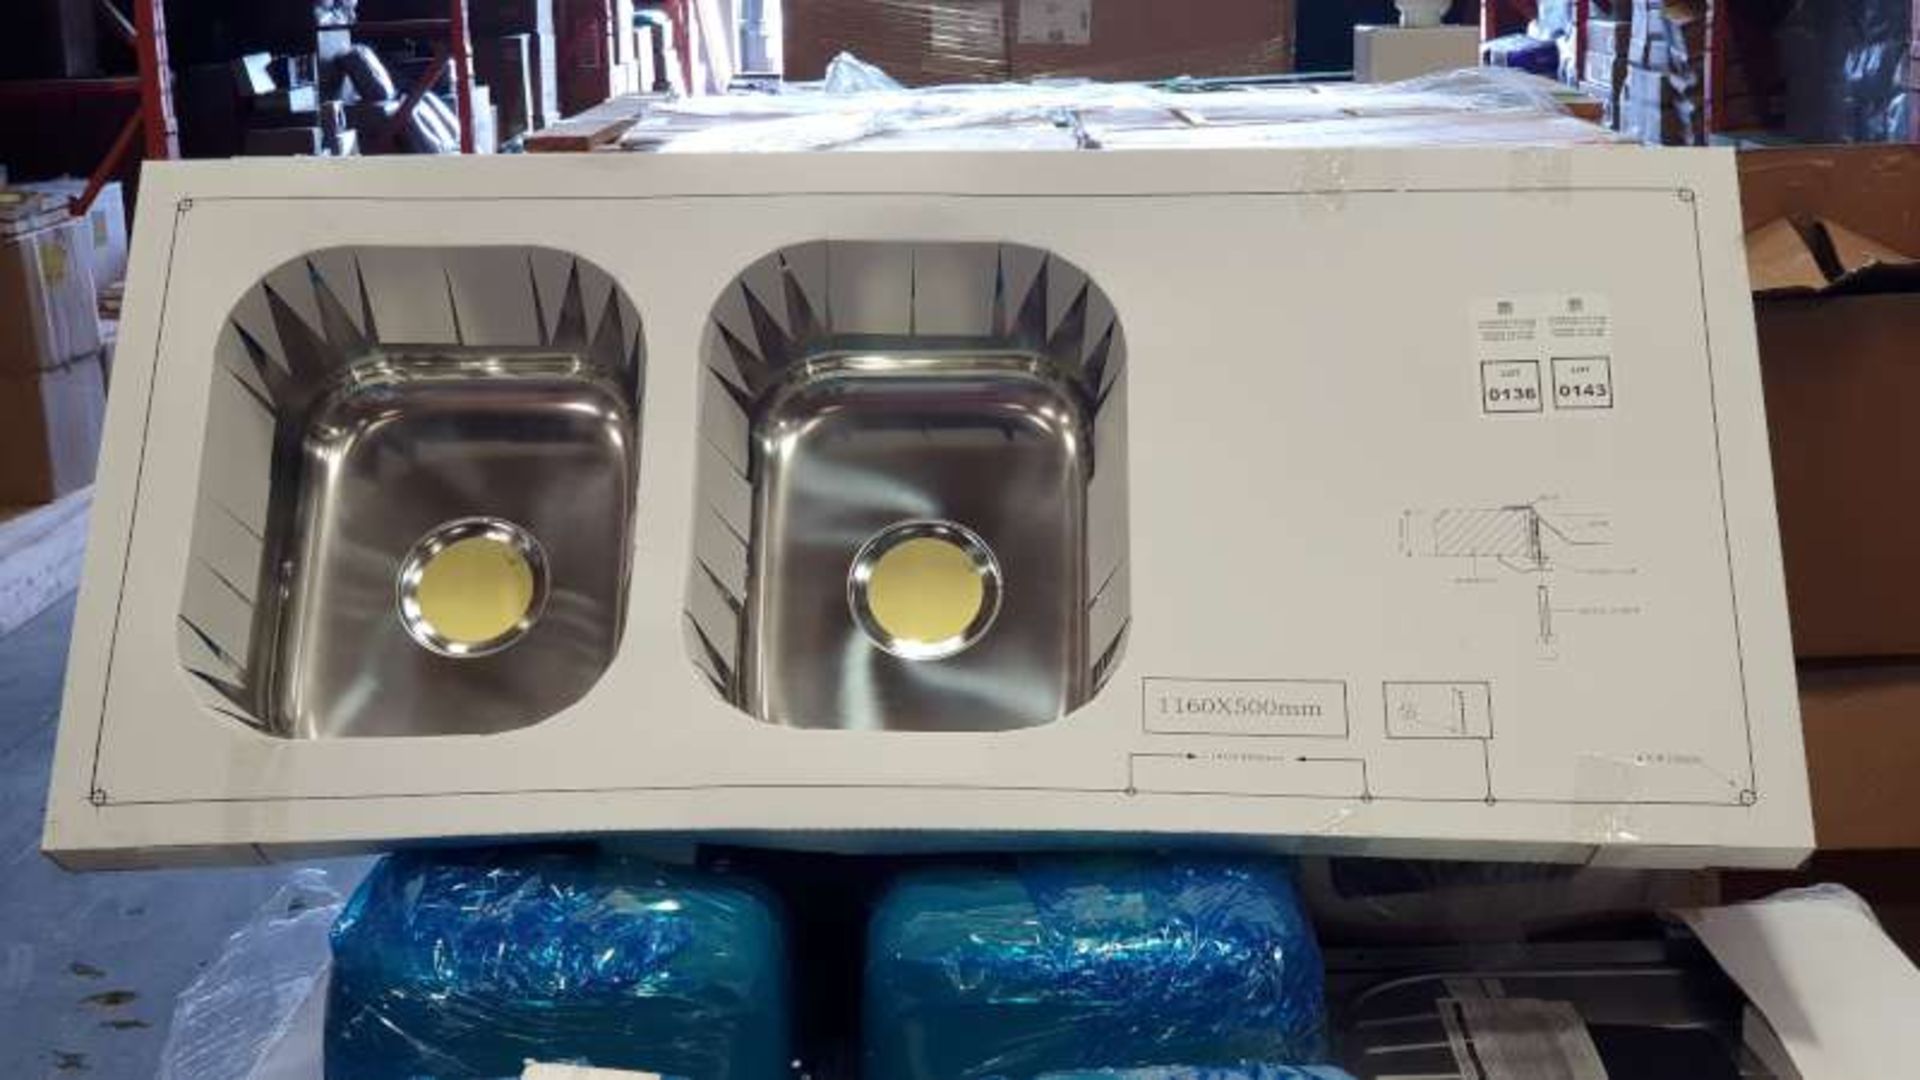 3 X BRAND NEW STAINLESS STEEL KORONA 2.0 BOWL AND DRAINER SIZE 1160 X 550 MM